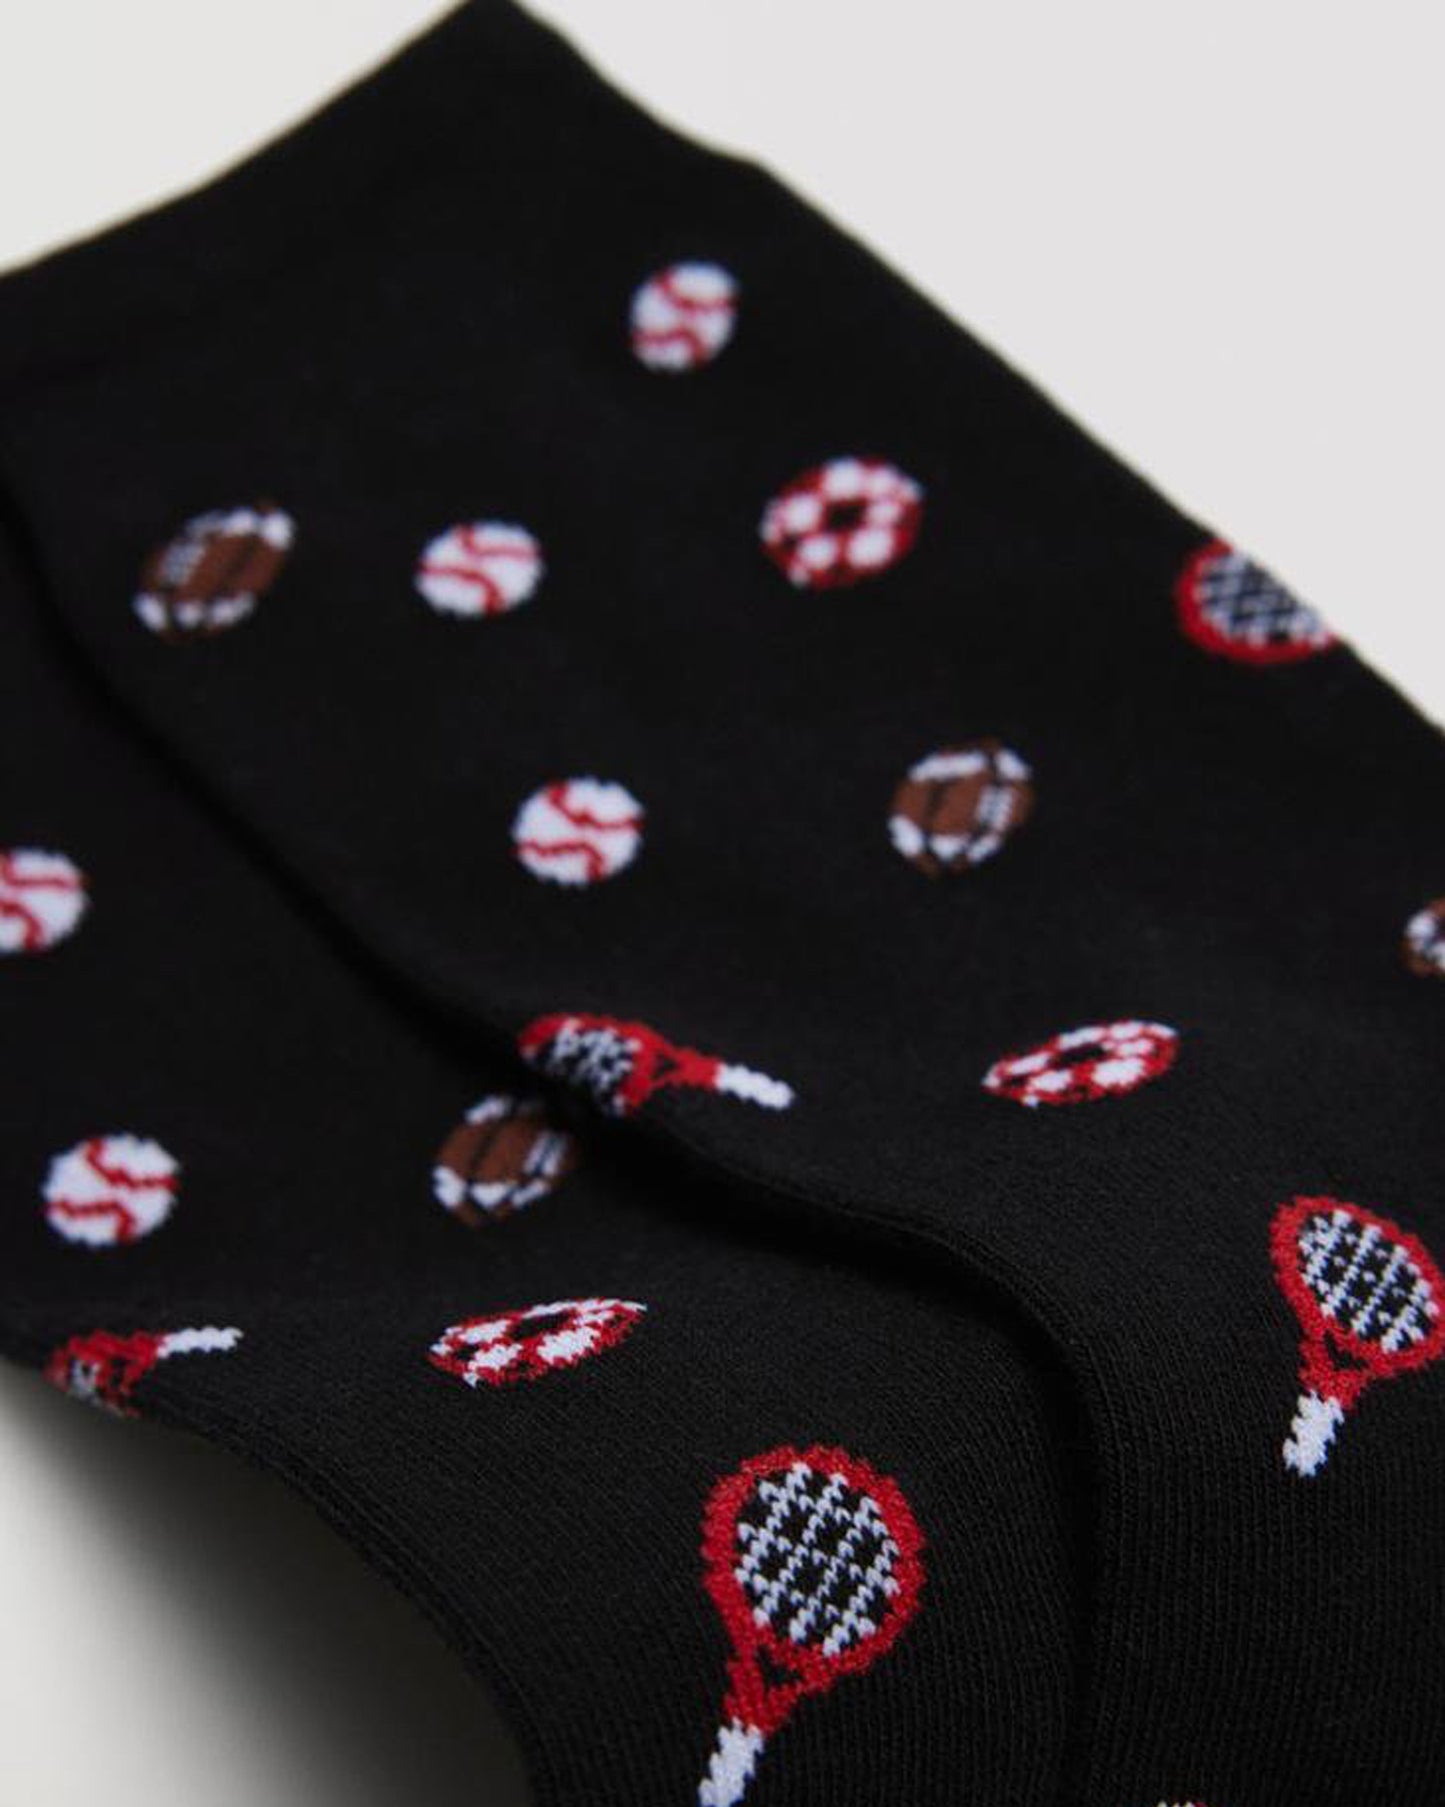 Close up detail of black cotton mix crew length men's ankle socks with an all over pattern of assorted sports balls including soccer, American football, baseball and tennis racket in brown, red and white.